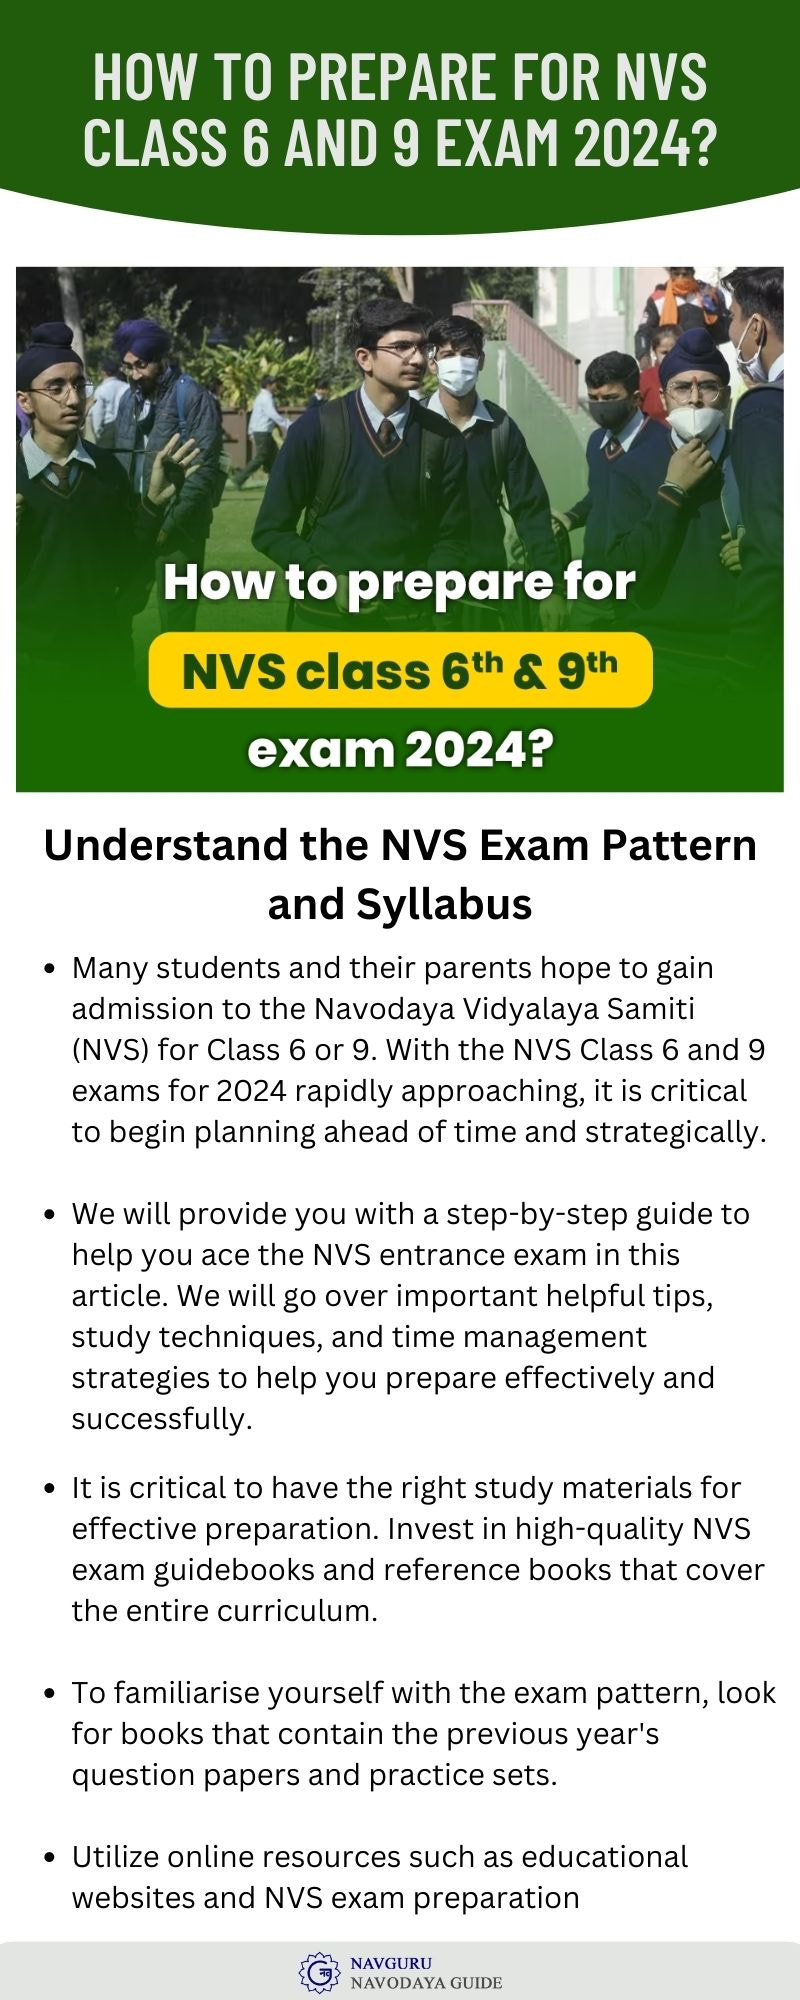 How to prepare for NVS class 6 and 9 exam 2024?